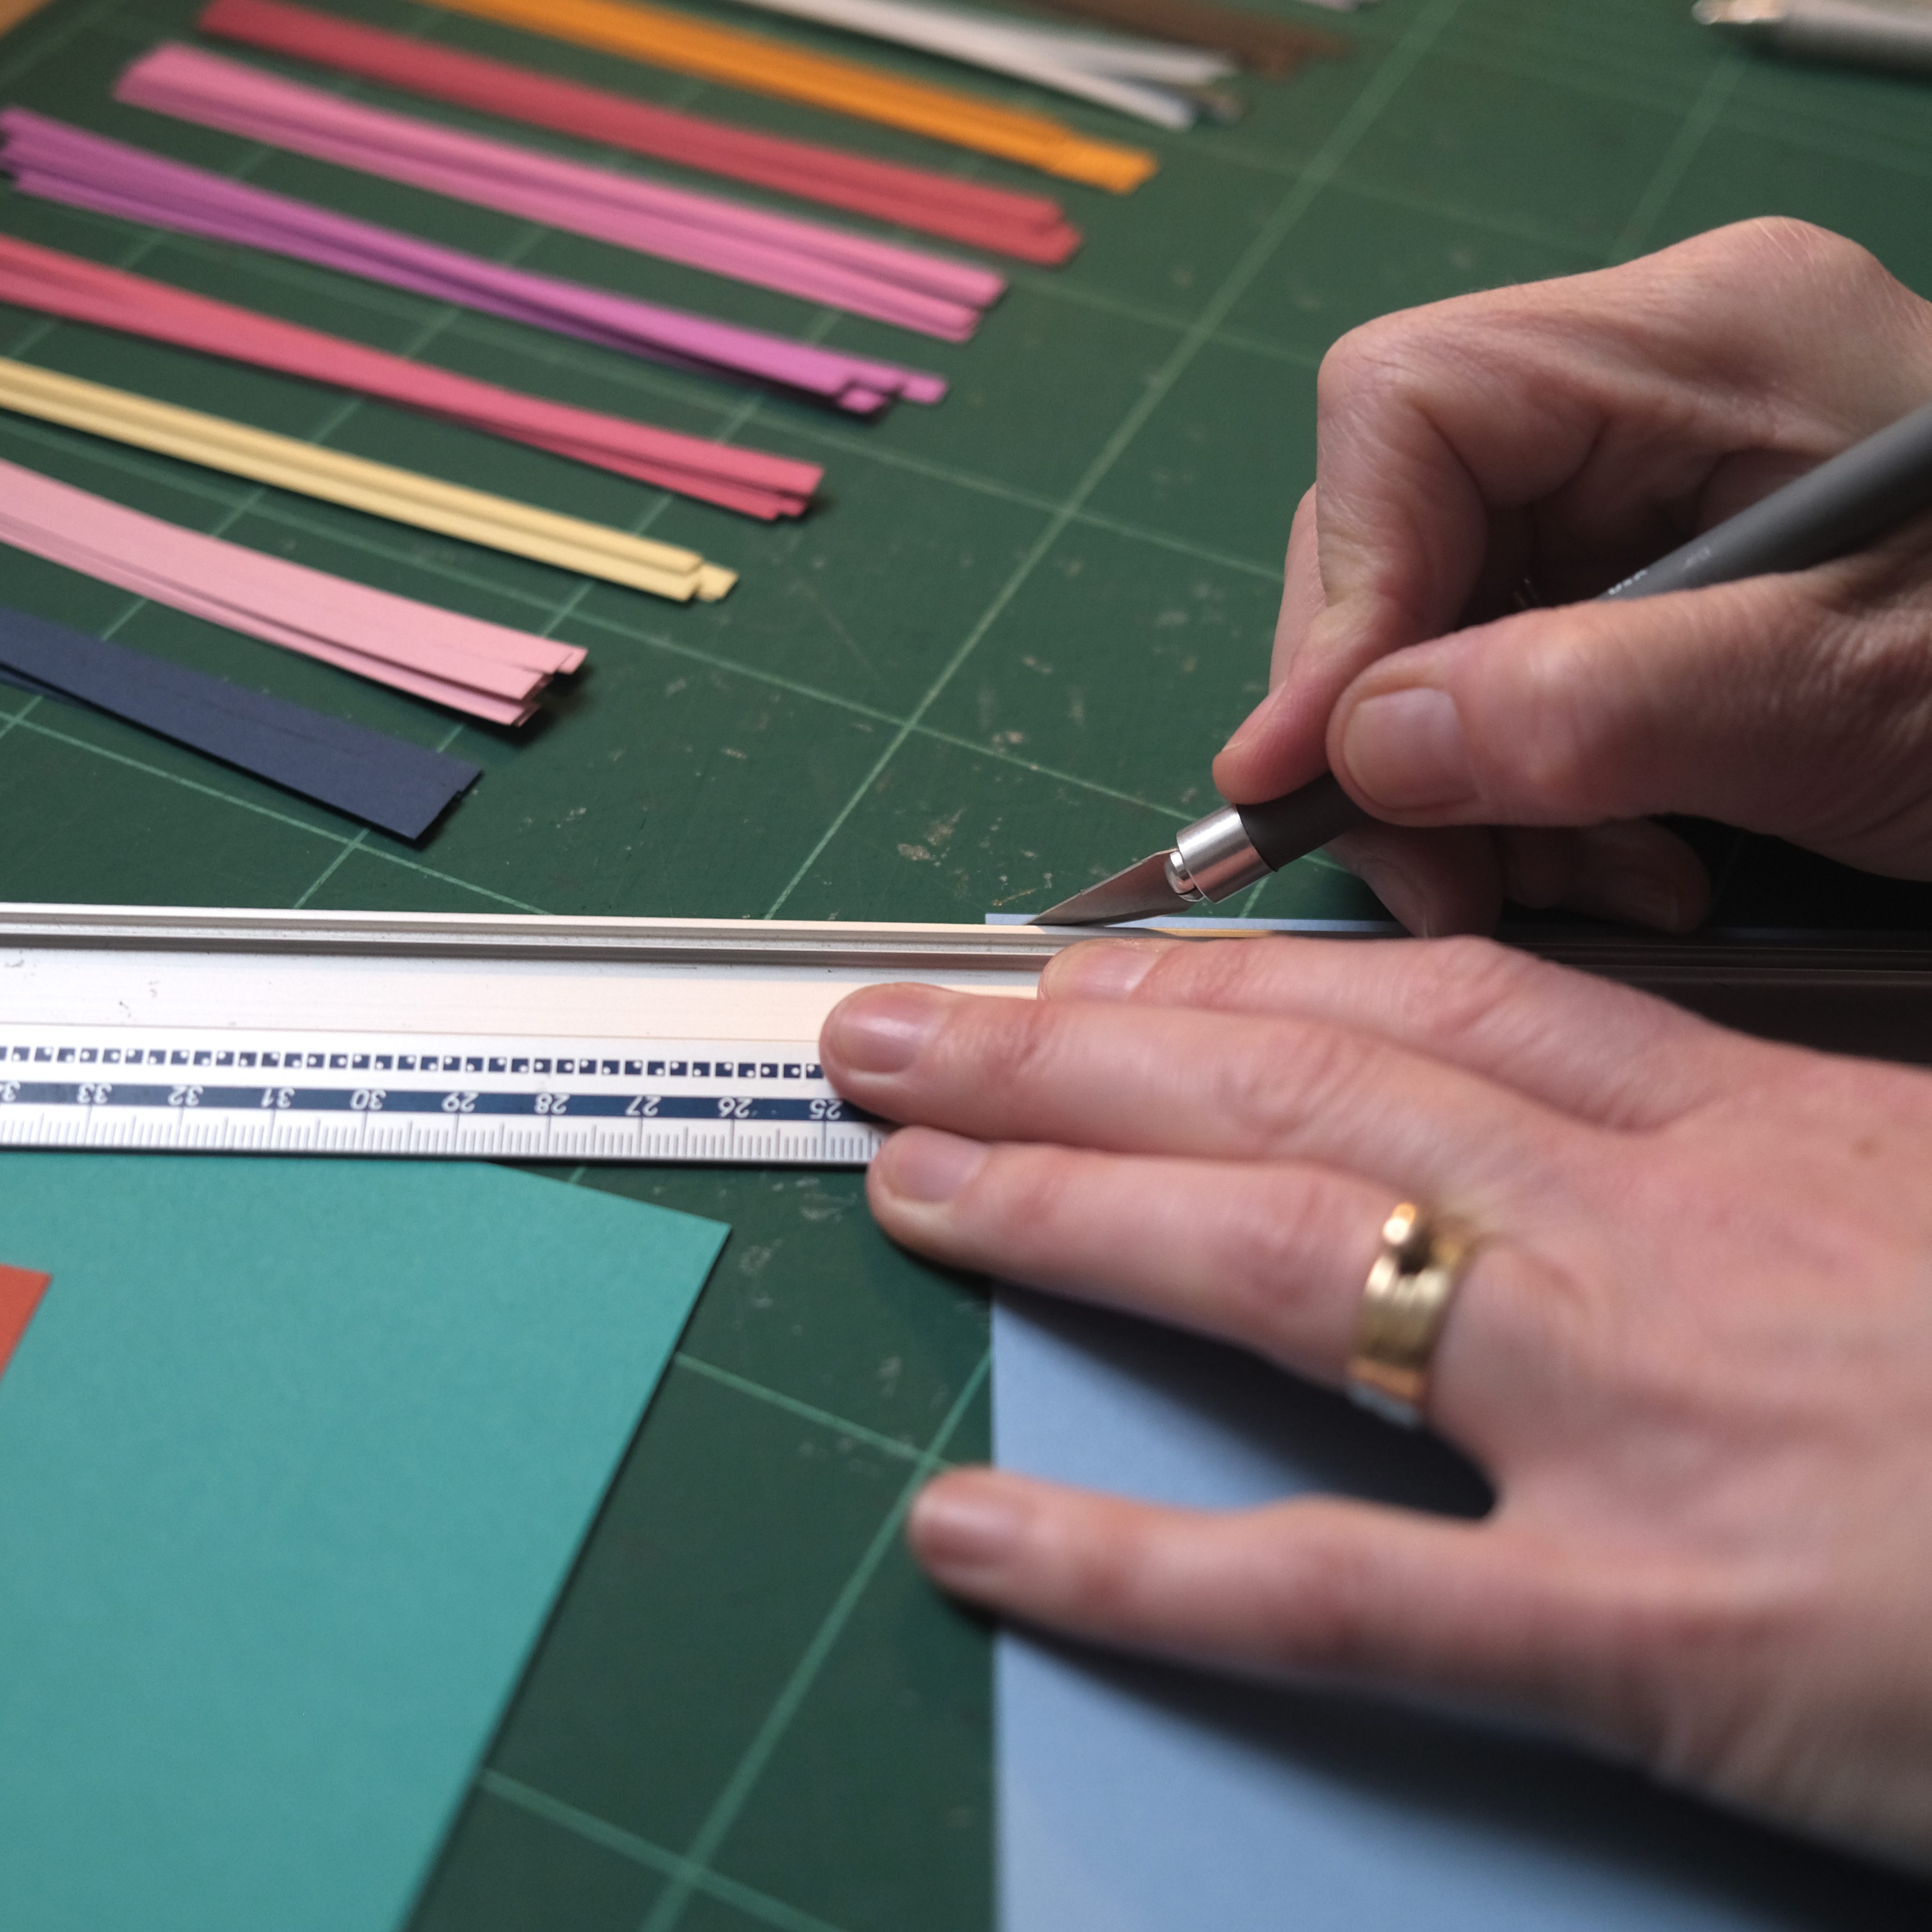 hand holding scalpel, cutting paper against a ruler